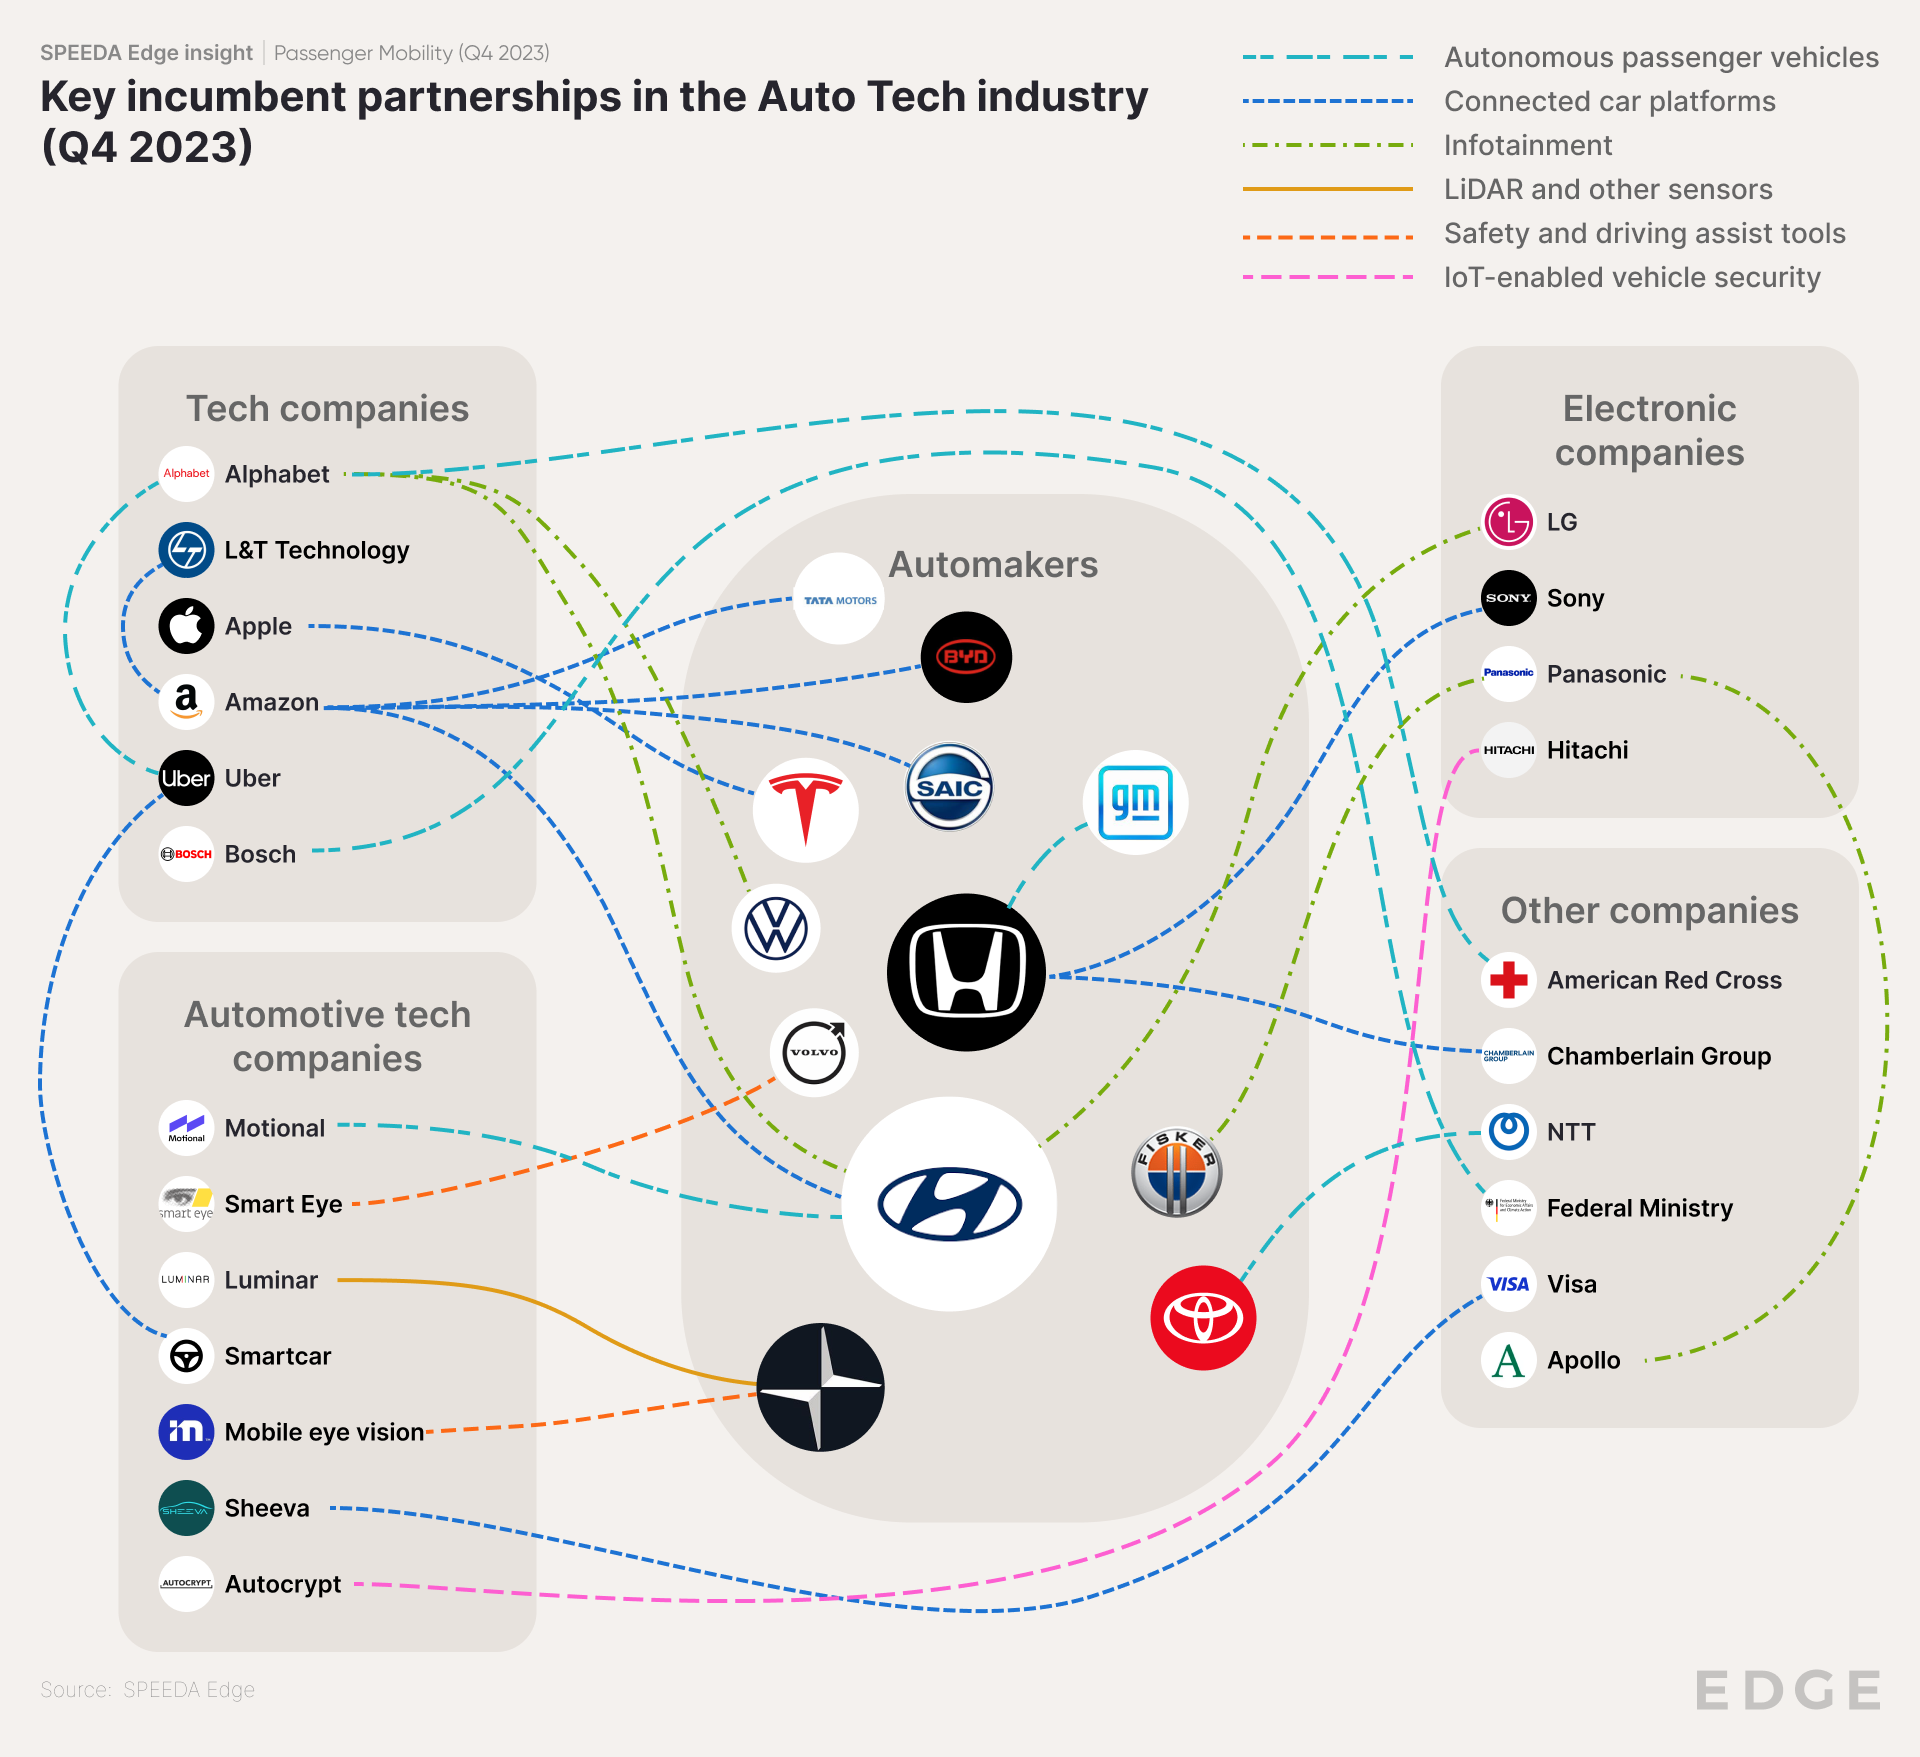 Key incumbent partnerships in the Auto Tech industry (Q4 2023)